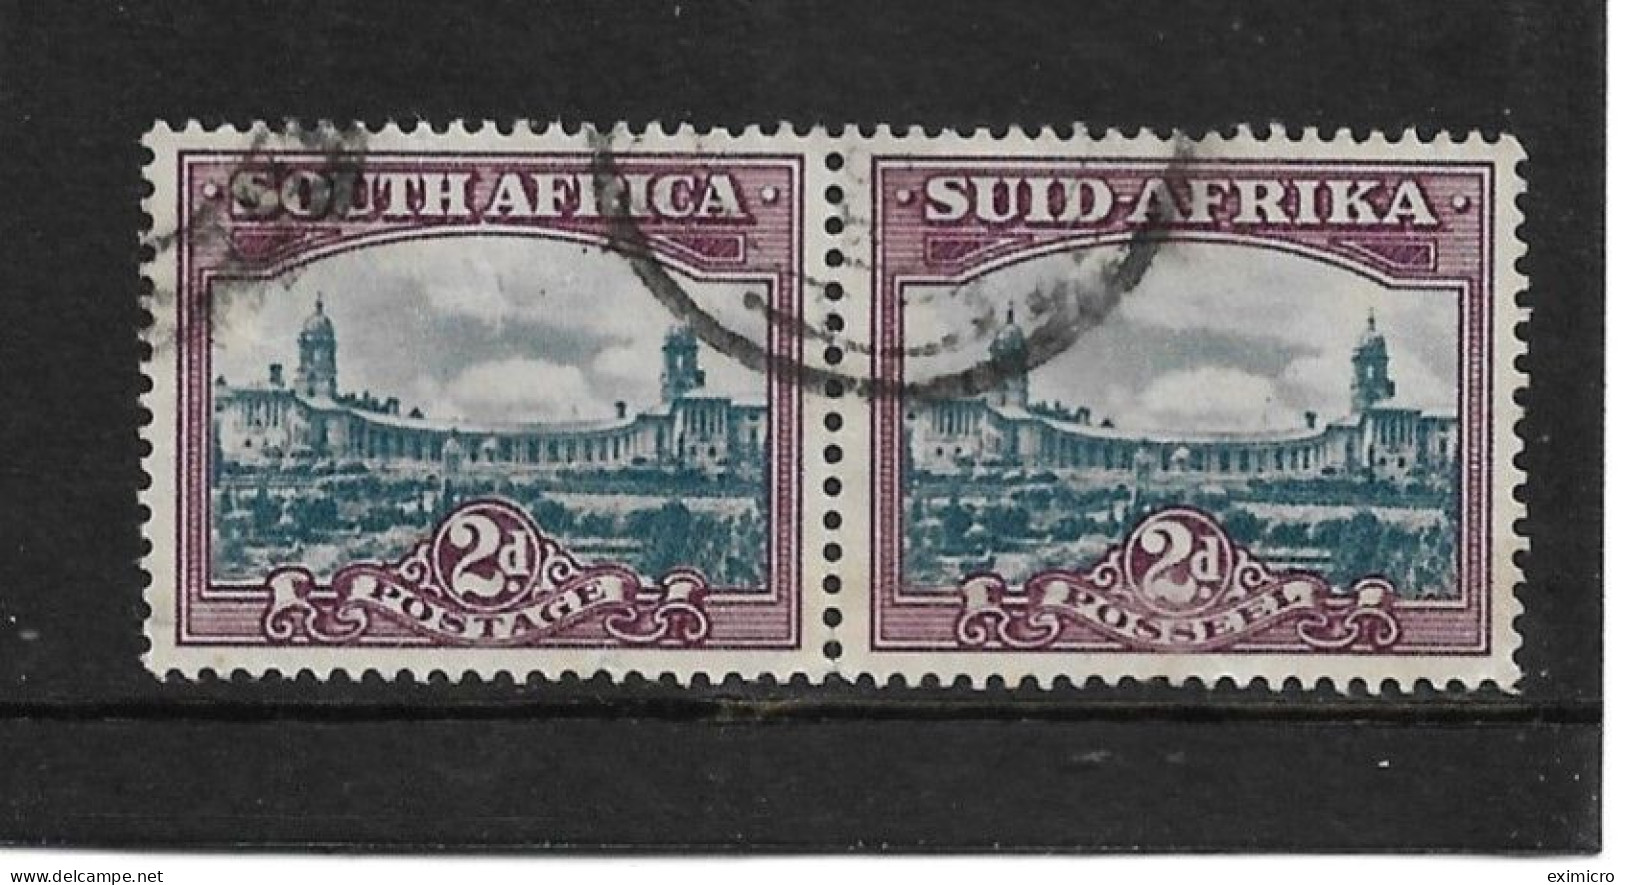 SOUTH AFRICA 1950 2d SLATE- BLUE AND PURPLE SG 116 FINE USED Cat £26 - Used Stamps